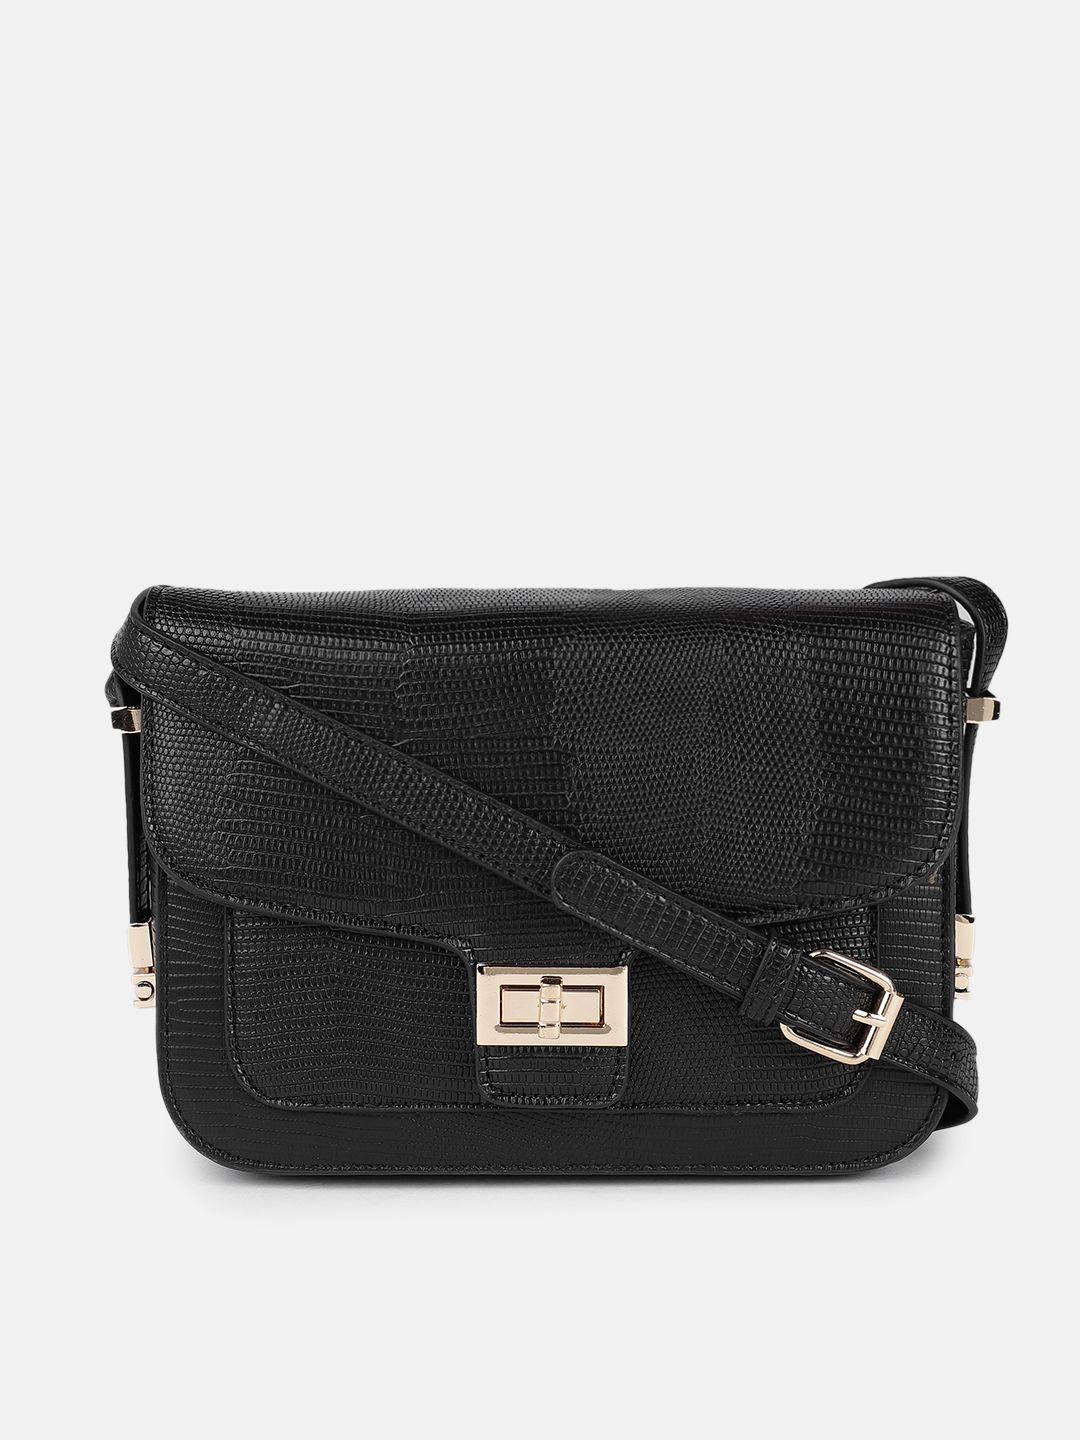 Mast & Harbour Black Animal Textured Structured Sling Bag Price in India